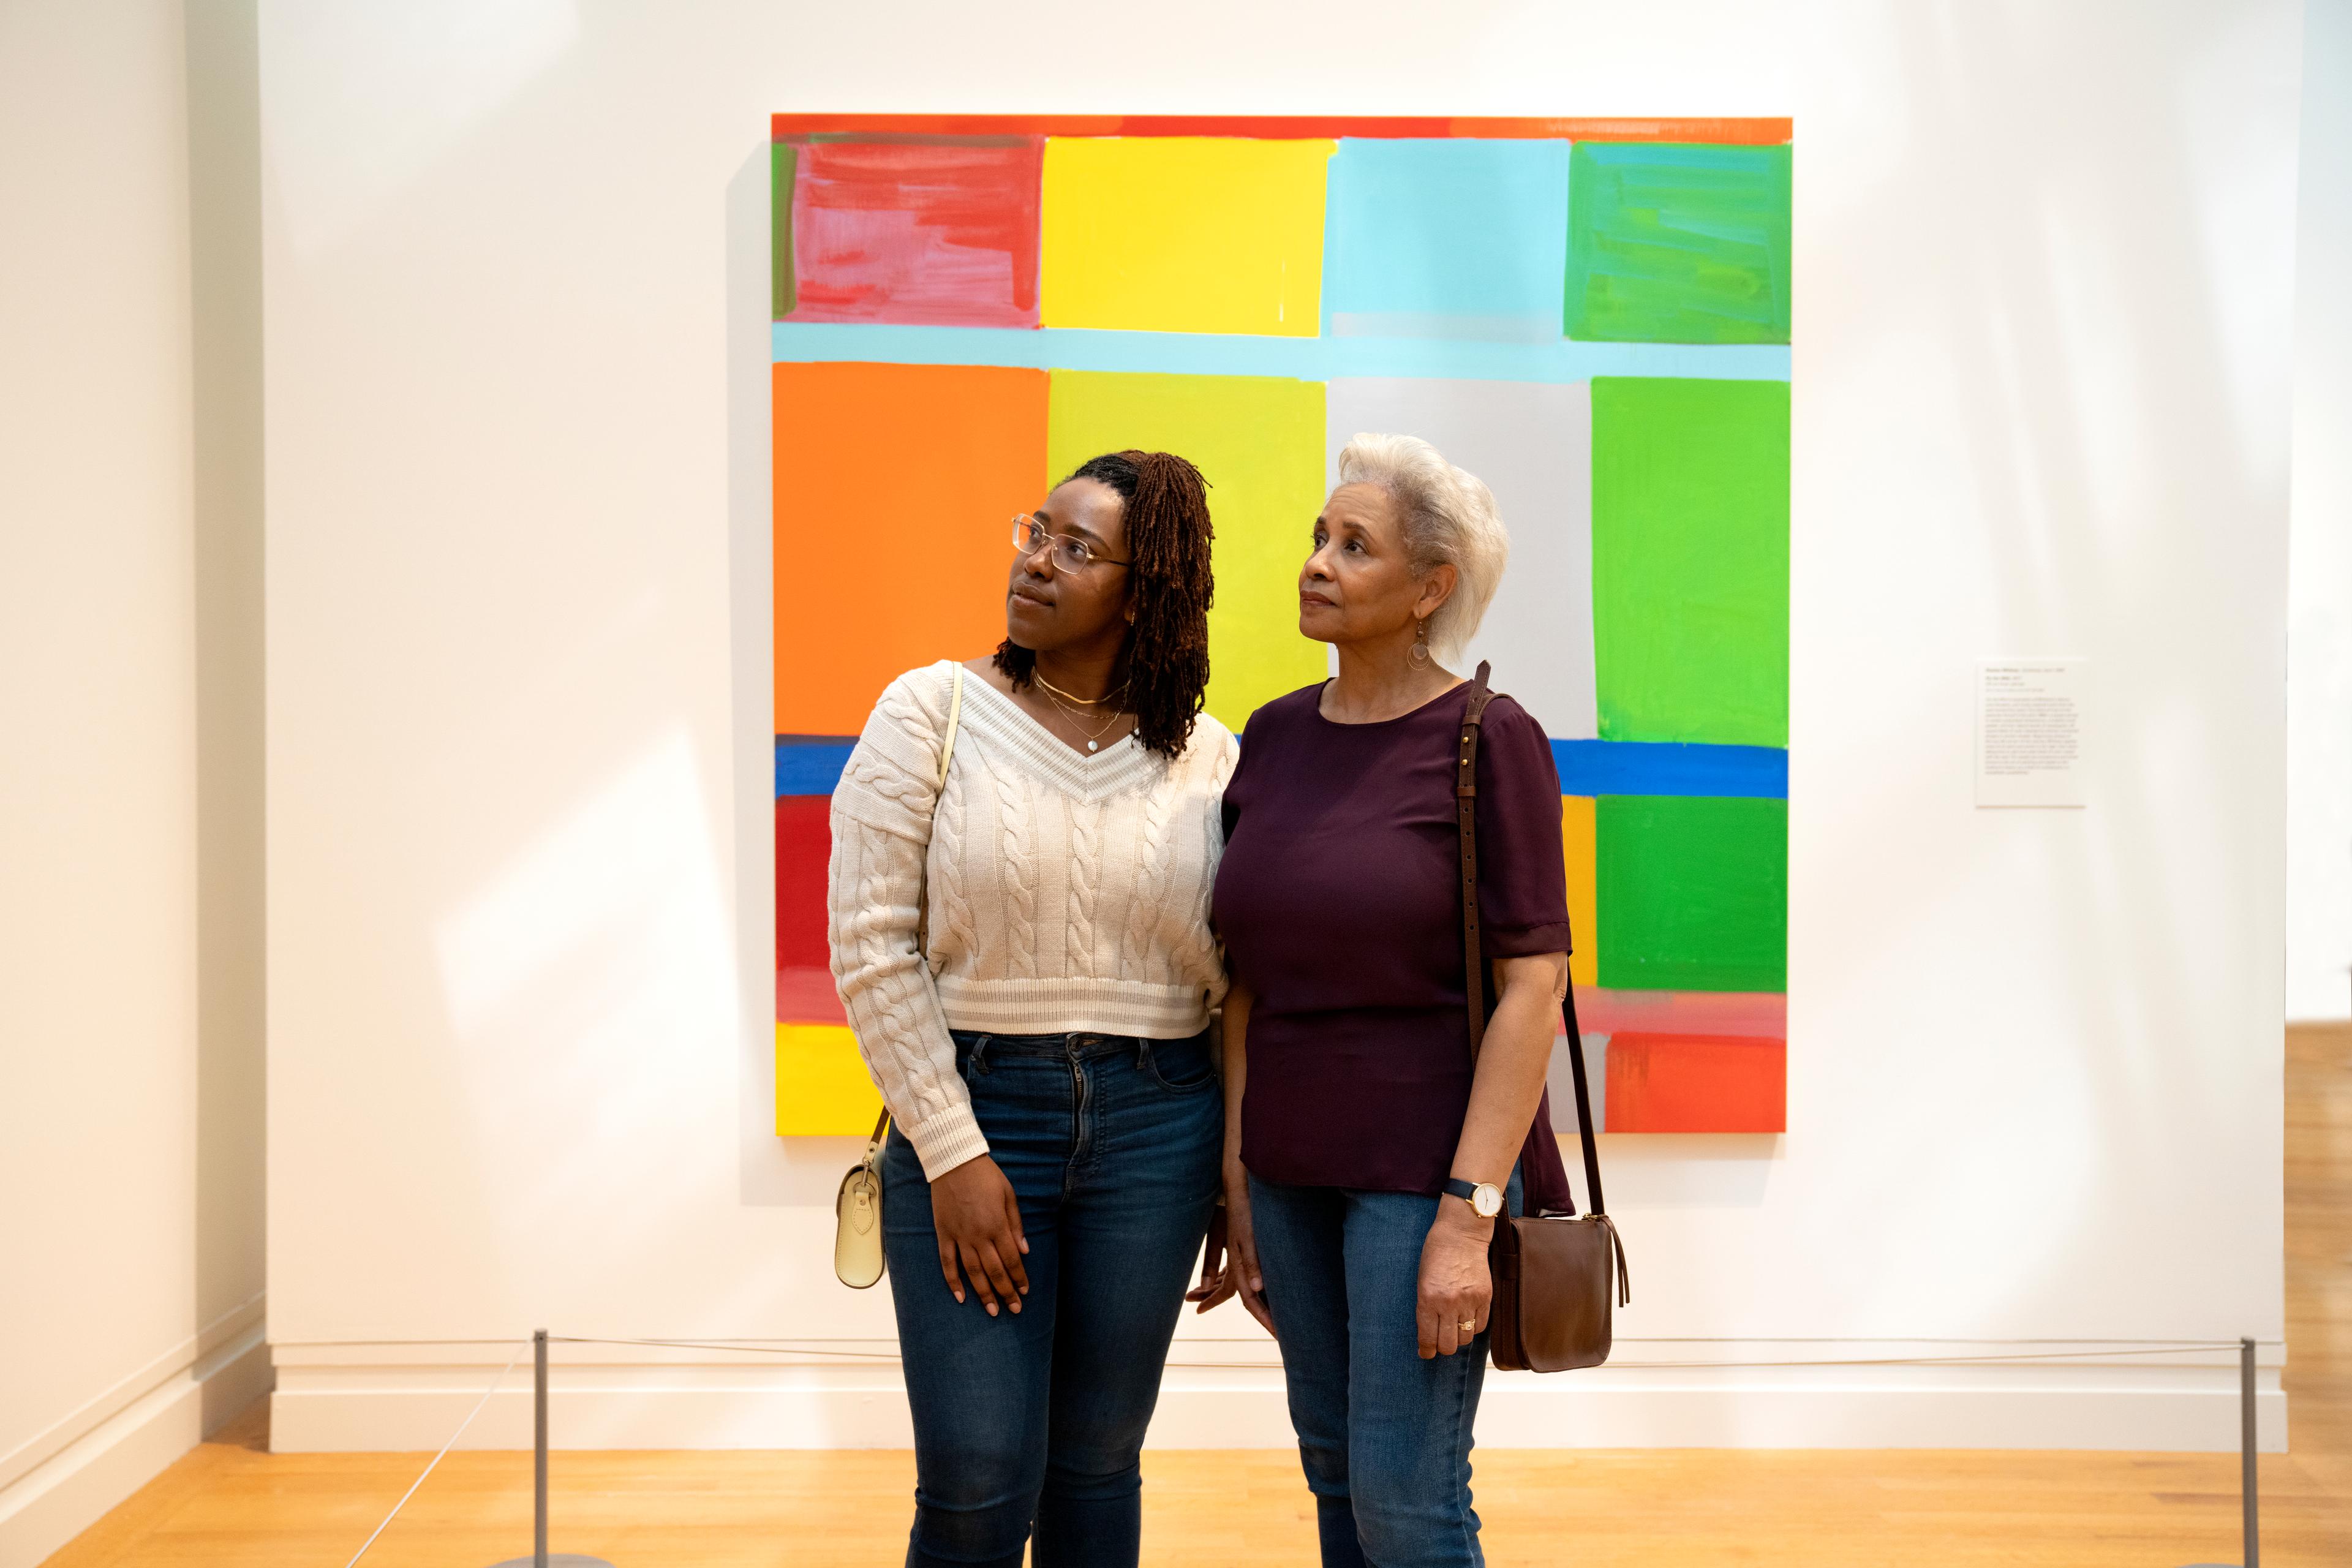 Two Black women, one older and one younger, stand contemplatively in The Met's Modern and Contemporary Wing in front of a bright abstract painting.